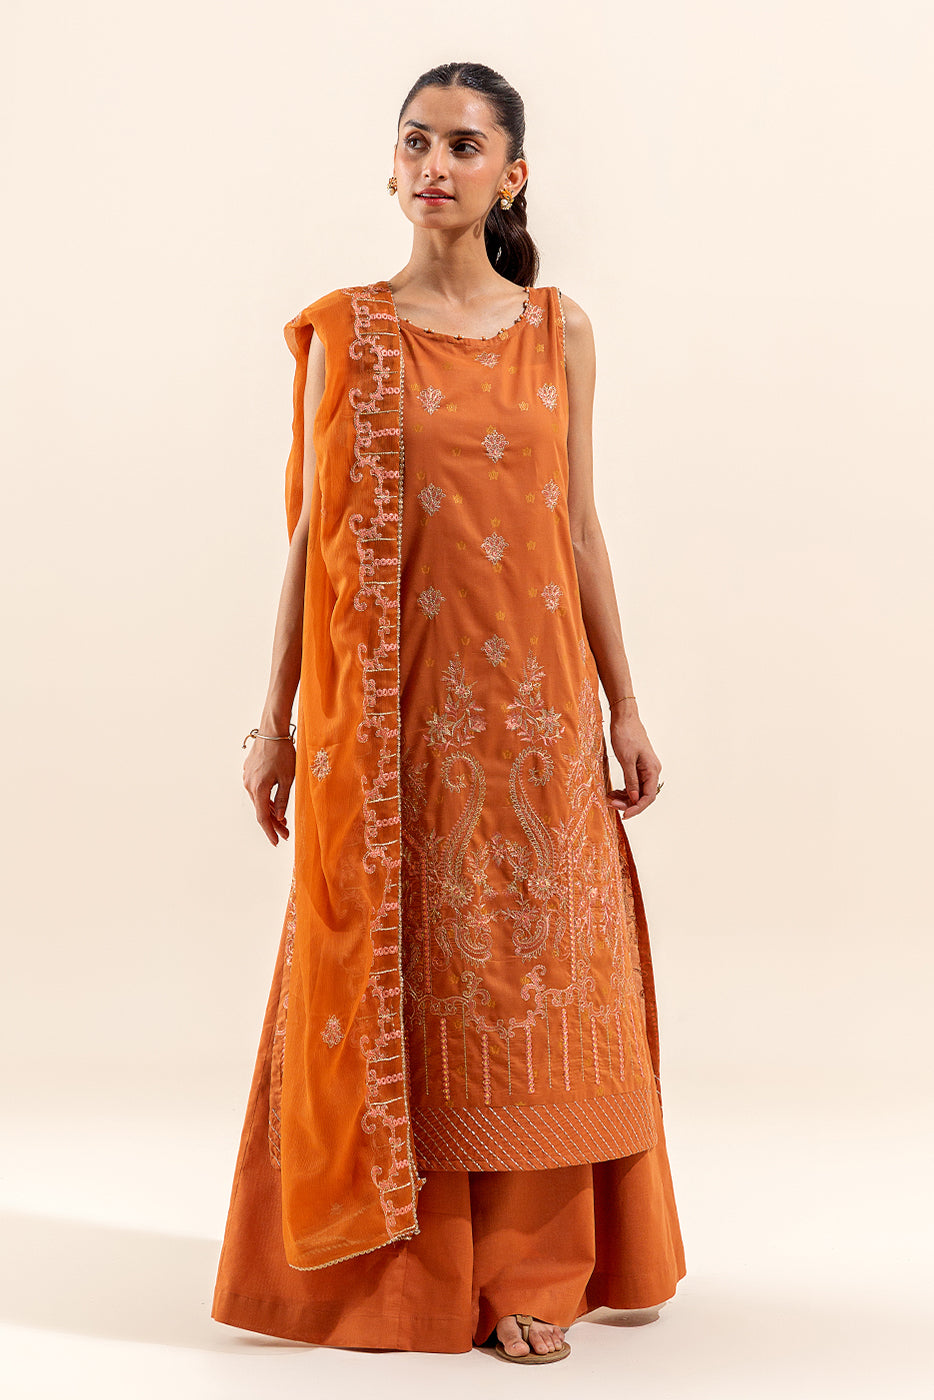 3 PIECE EMBROIDERED LAWN SUIT-SUNSET YAM (UNSTITCHED)